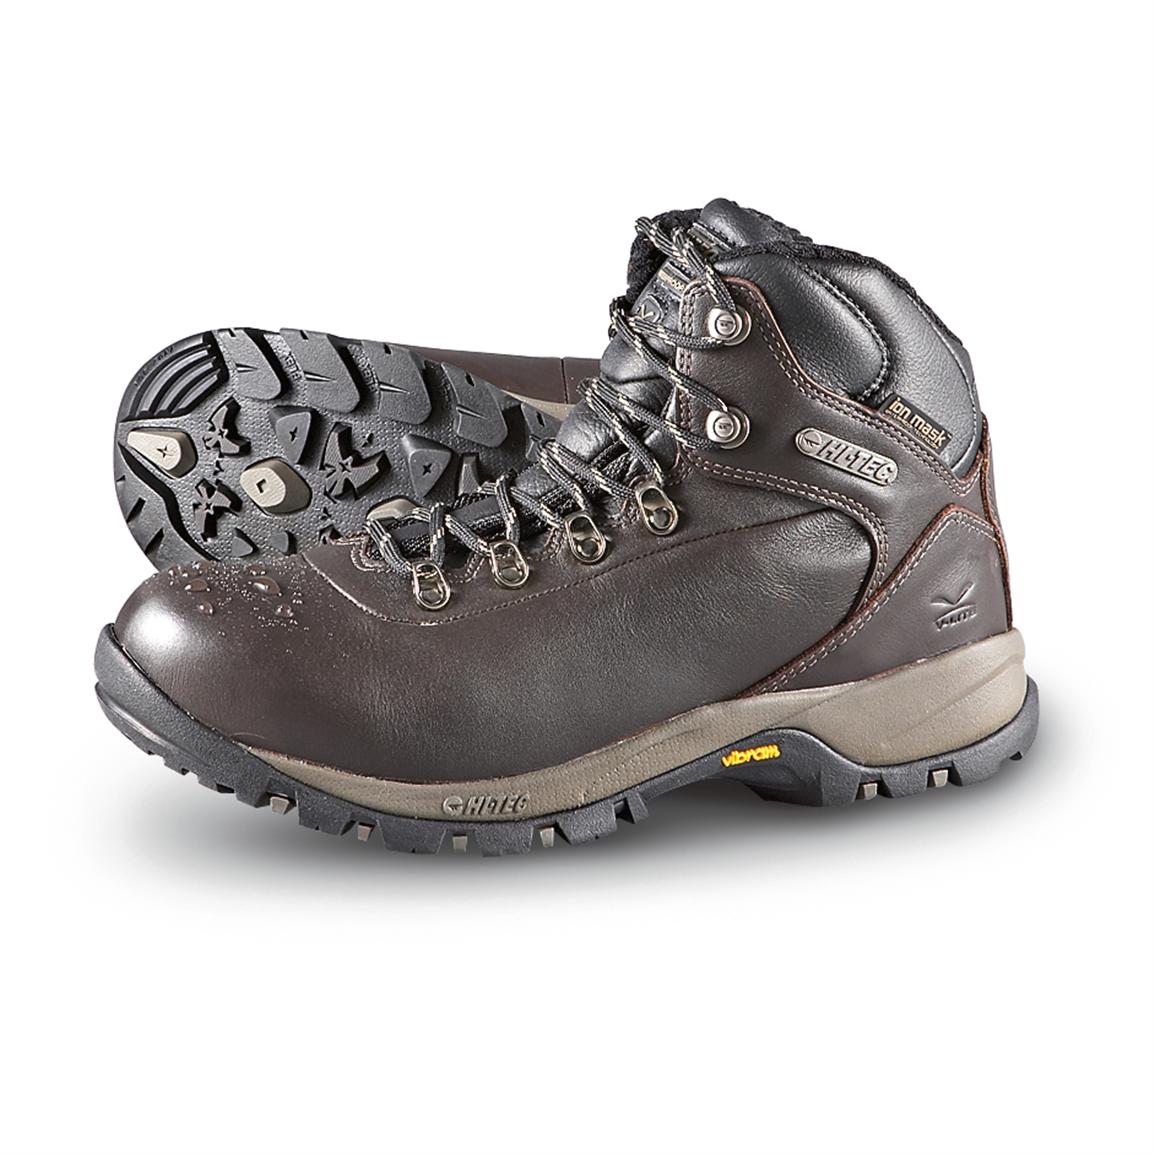 Lite Altitude Ultra Boots, Chocolate 